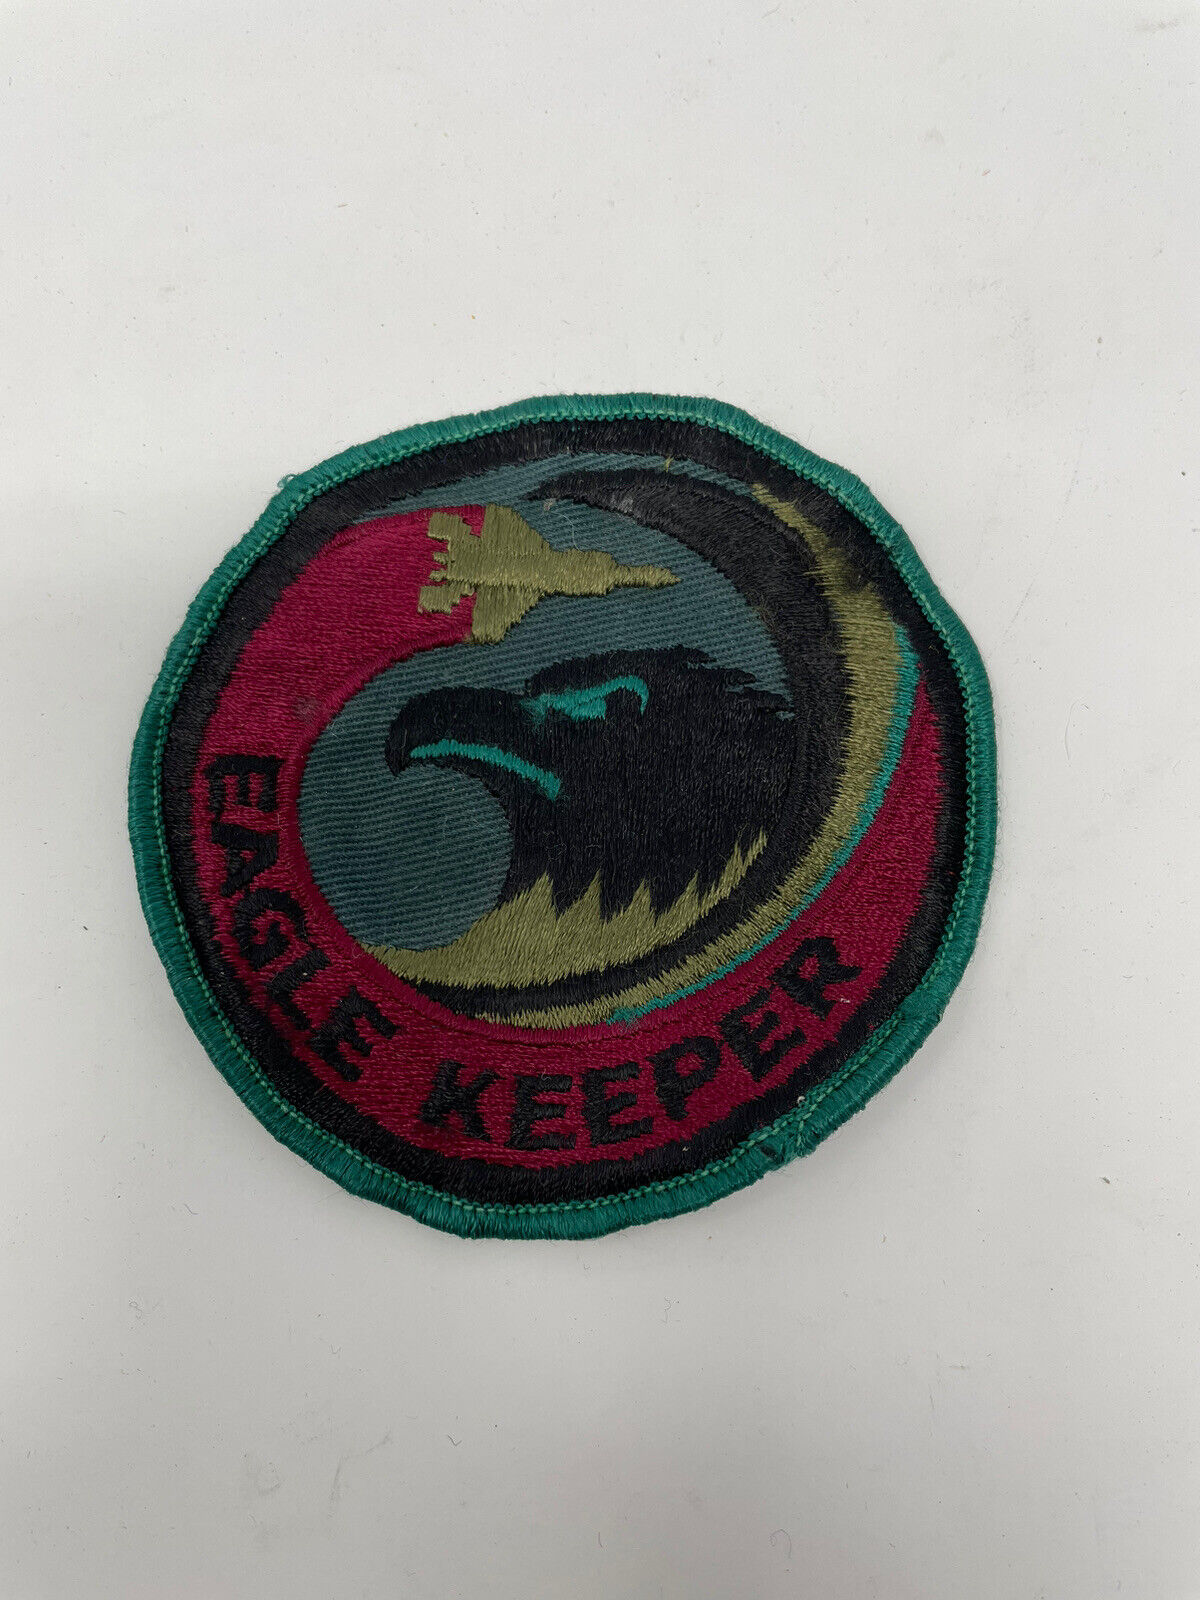 USAF AIR FORCE  McDonnell Douglas F-15 Eagle Keeper Patch SUBDUED 3